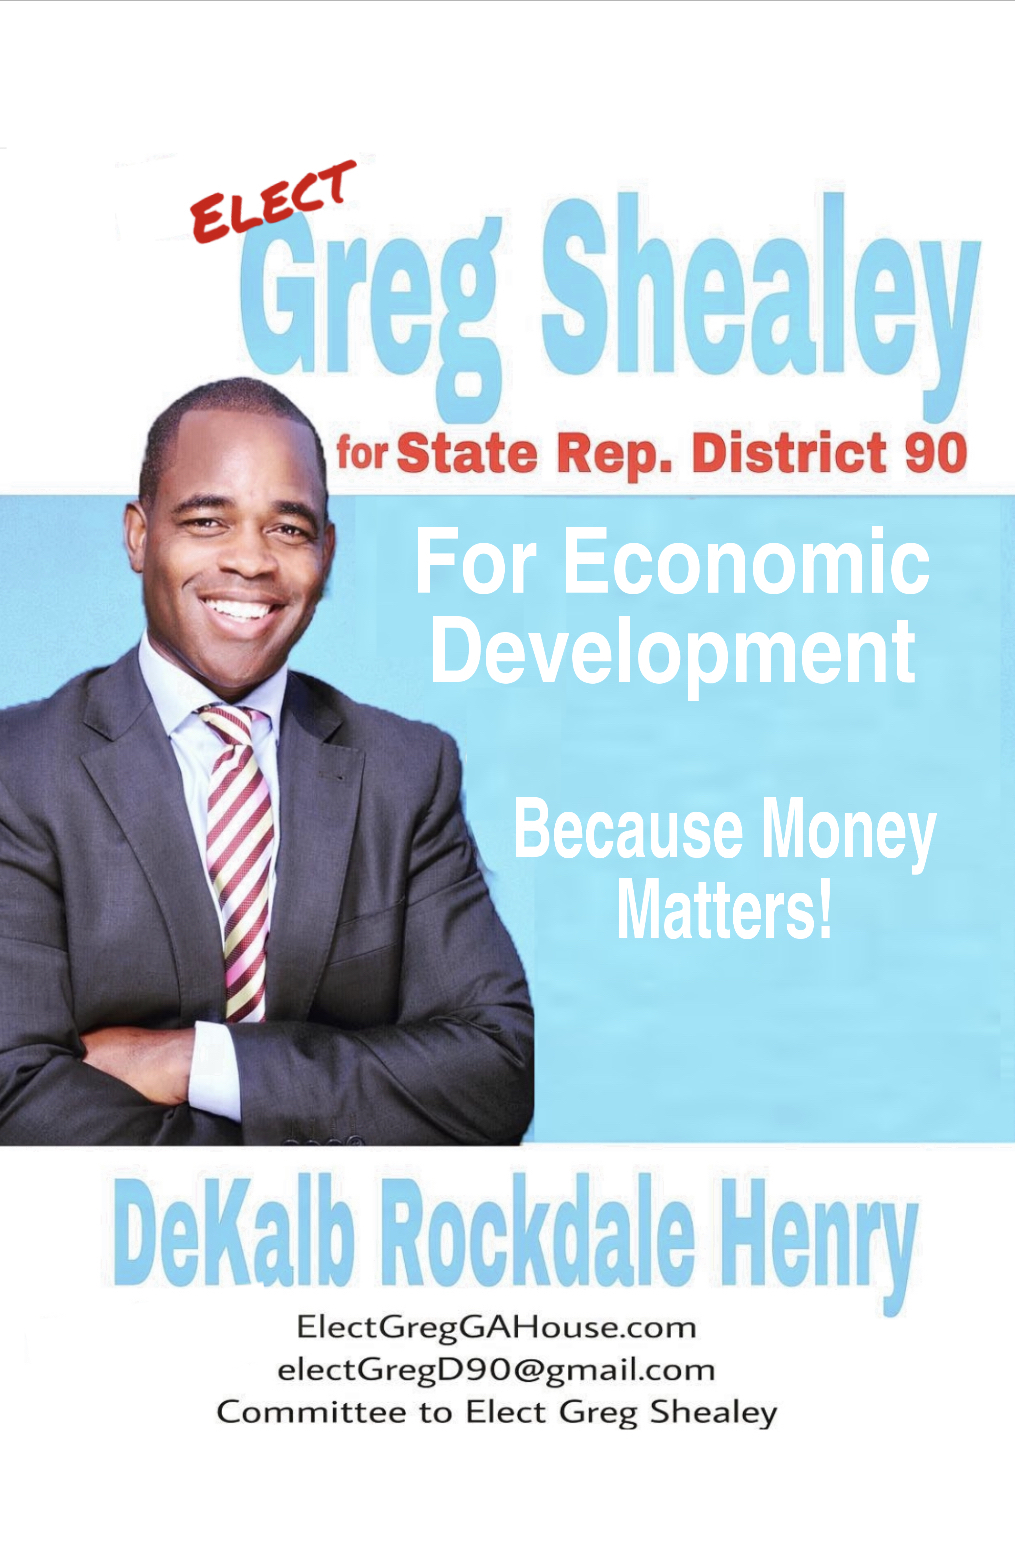 Committee to Elect Greg Shealey logo